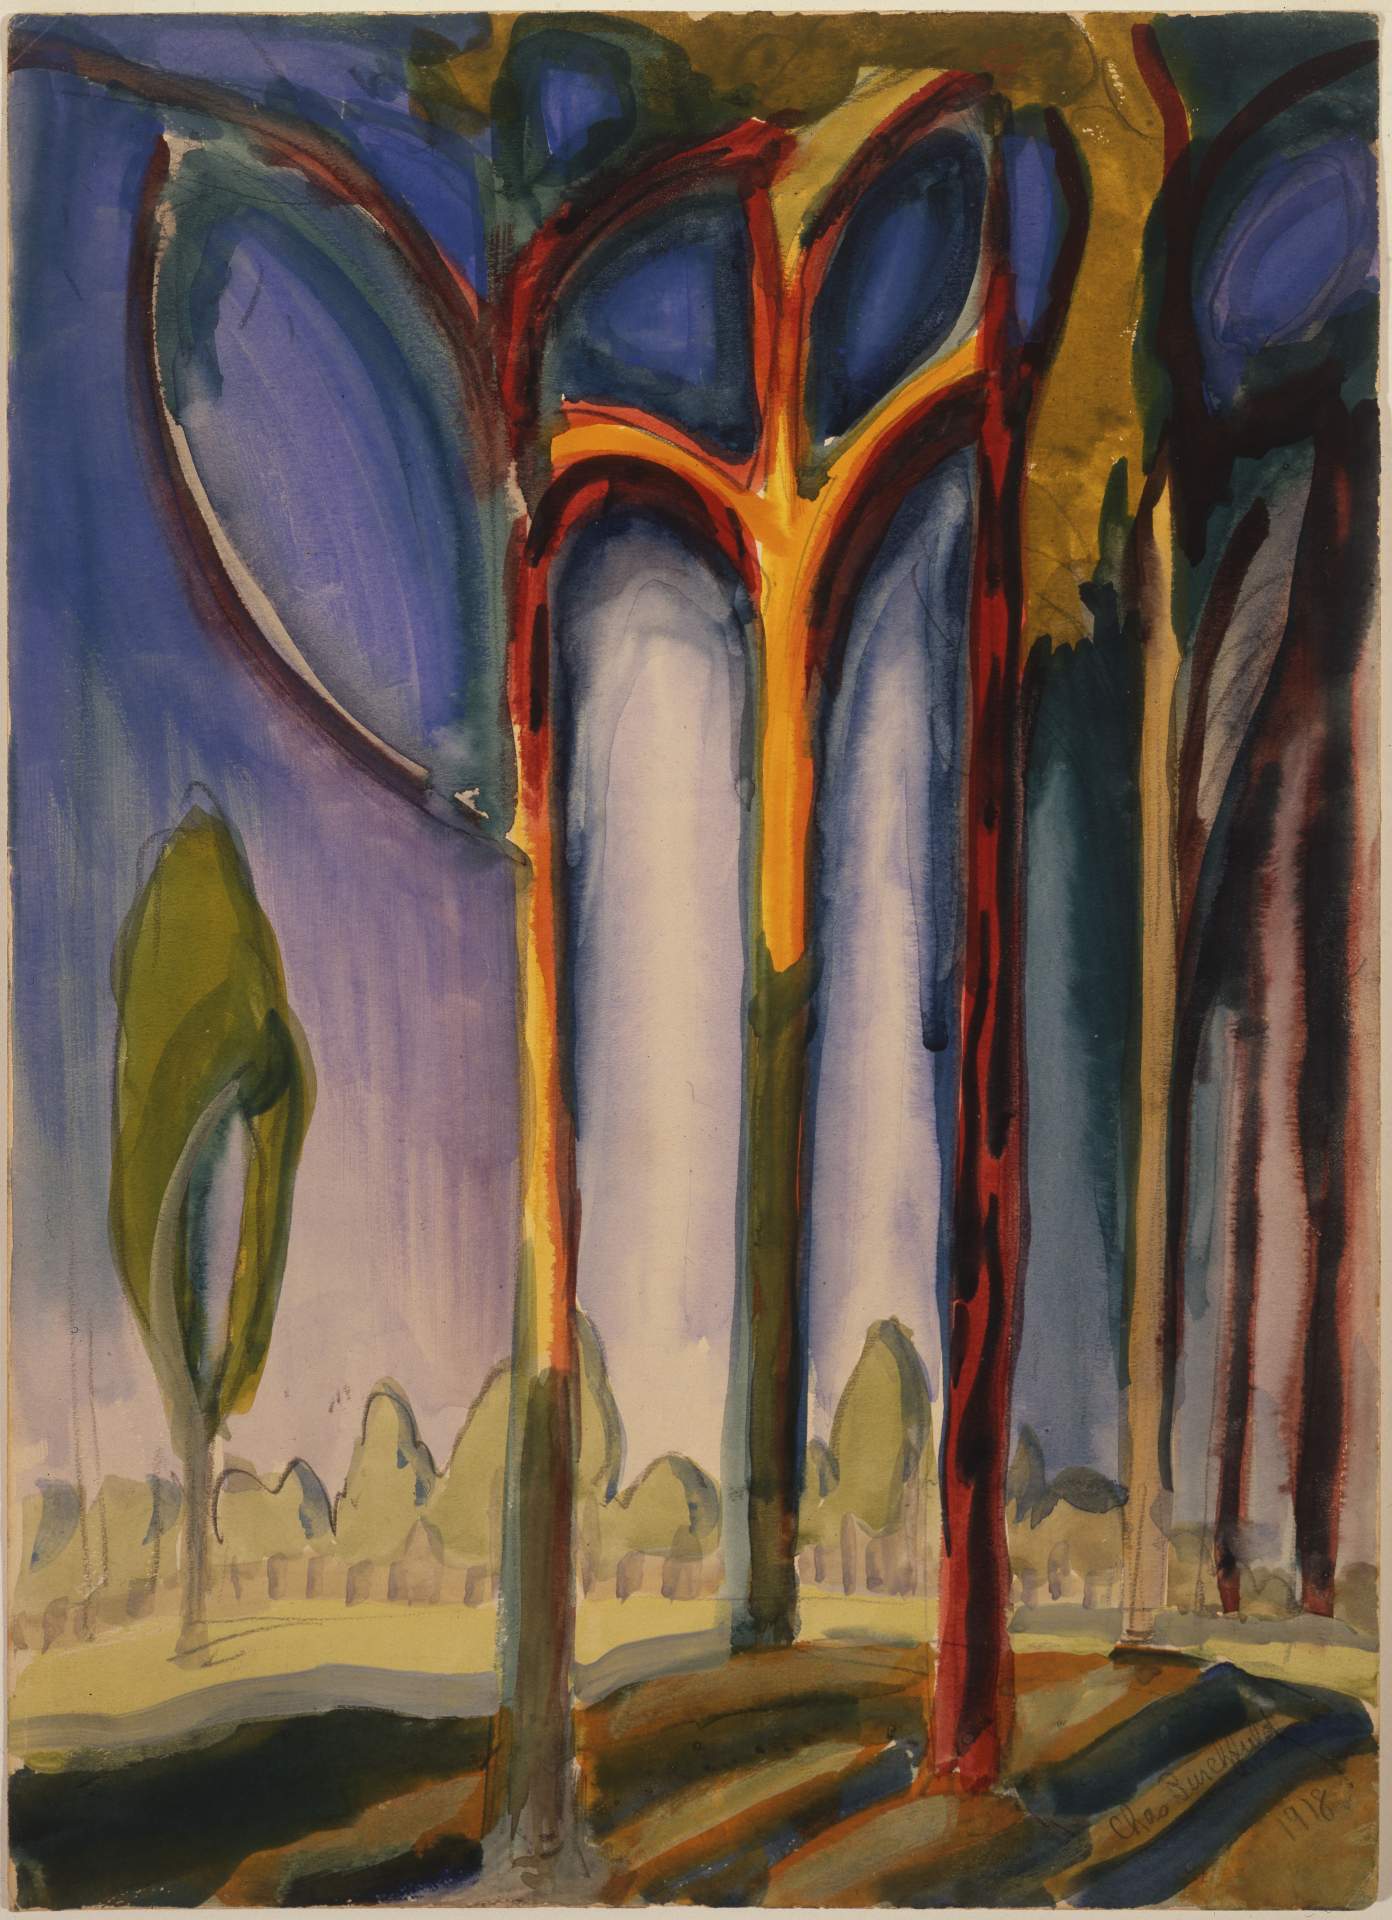 Exalted Nature: The Real and Fantastic World of Charles Burchfield Coming to Brandywine River Museum of Art